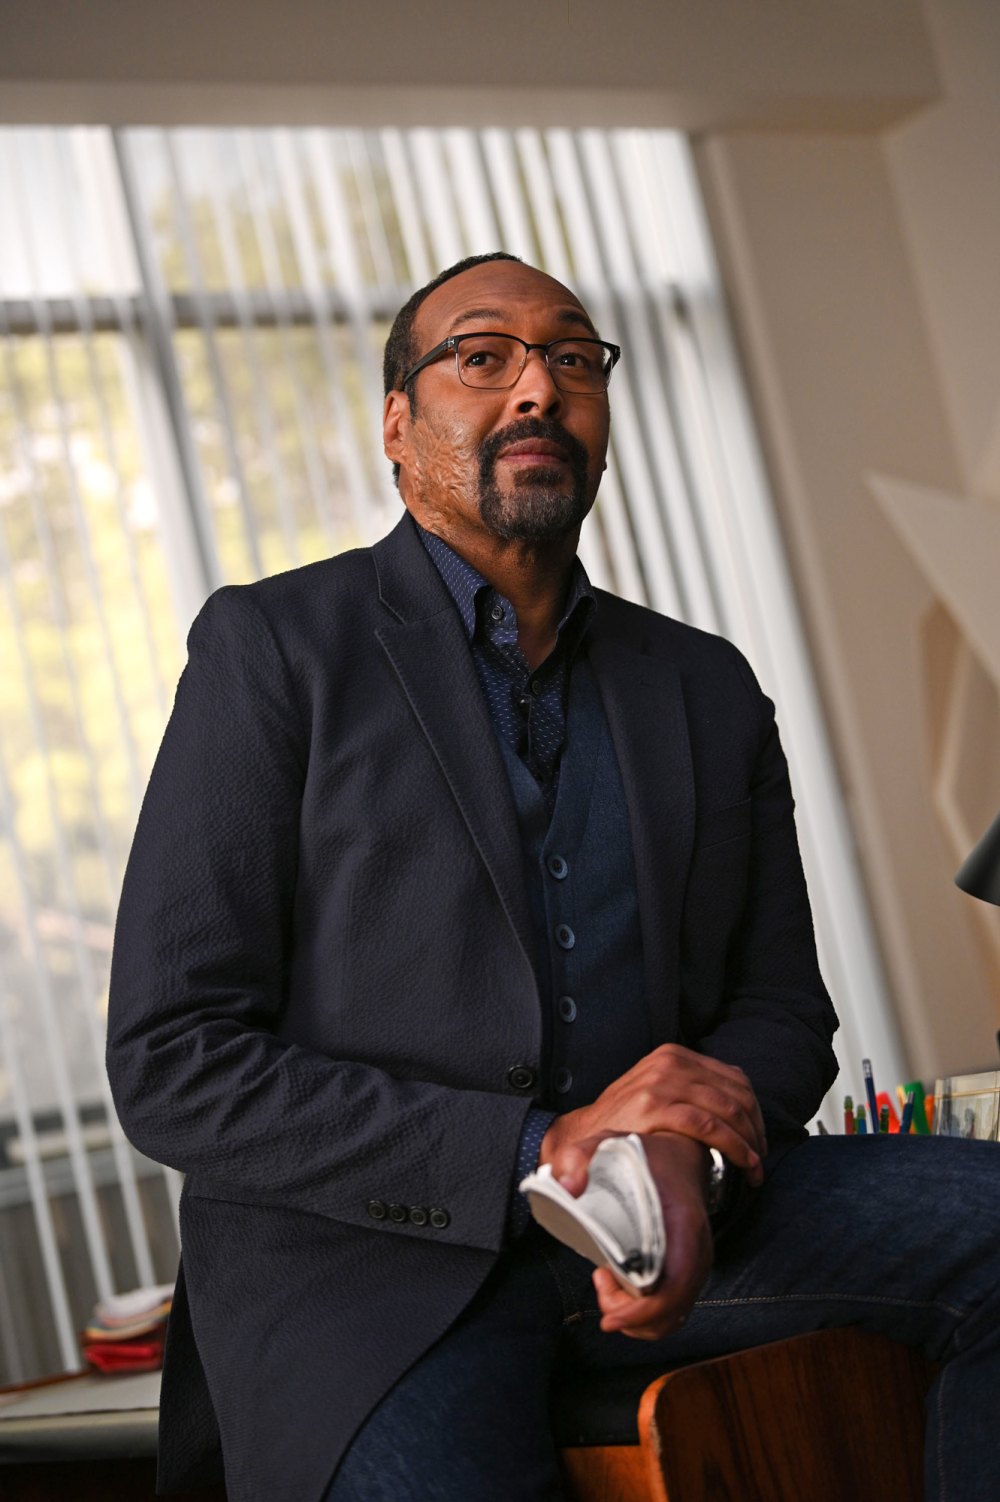 The Irrational Jesse L Martin Reacts to Reading Thirsty Comments